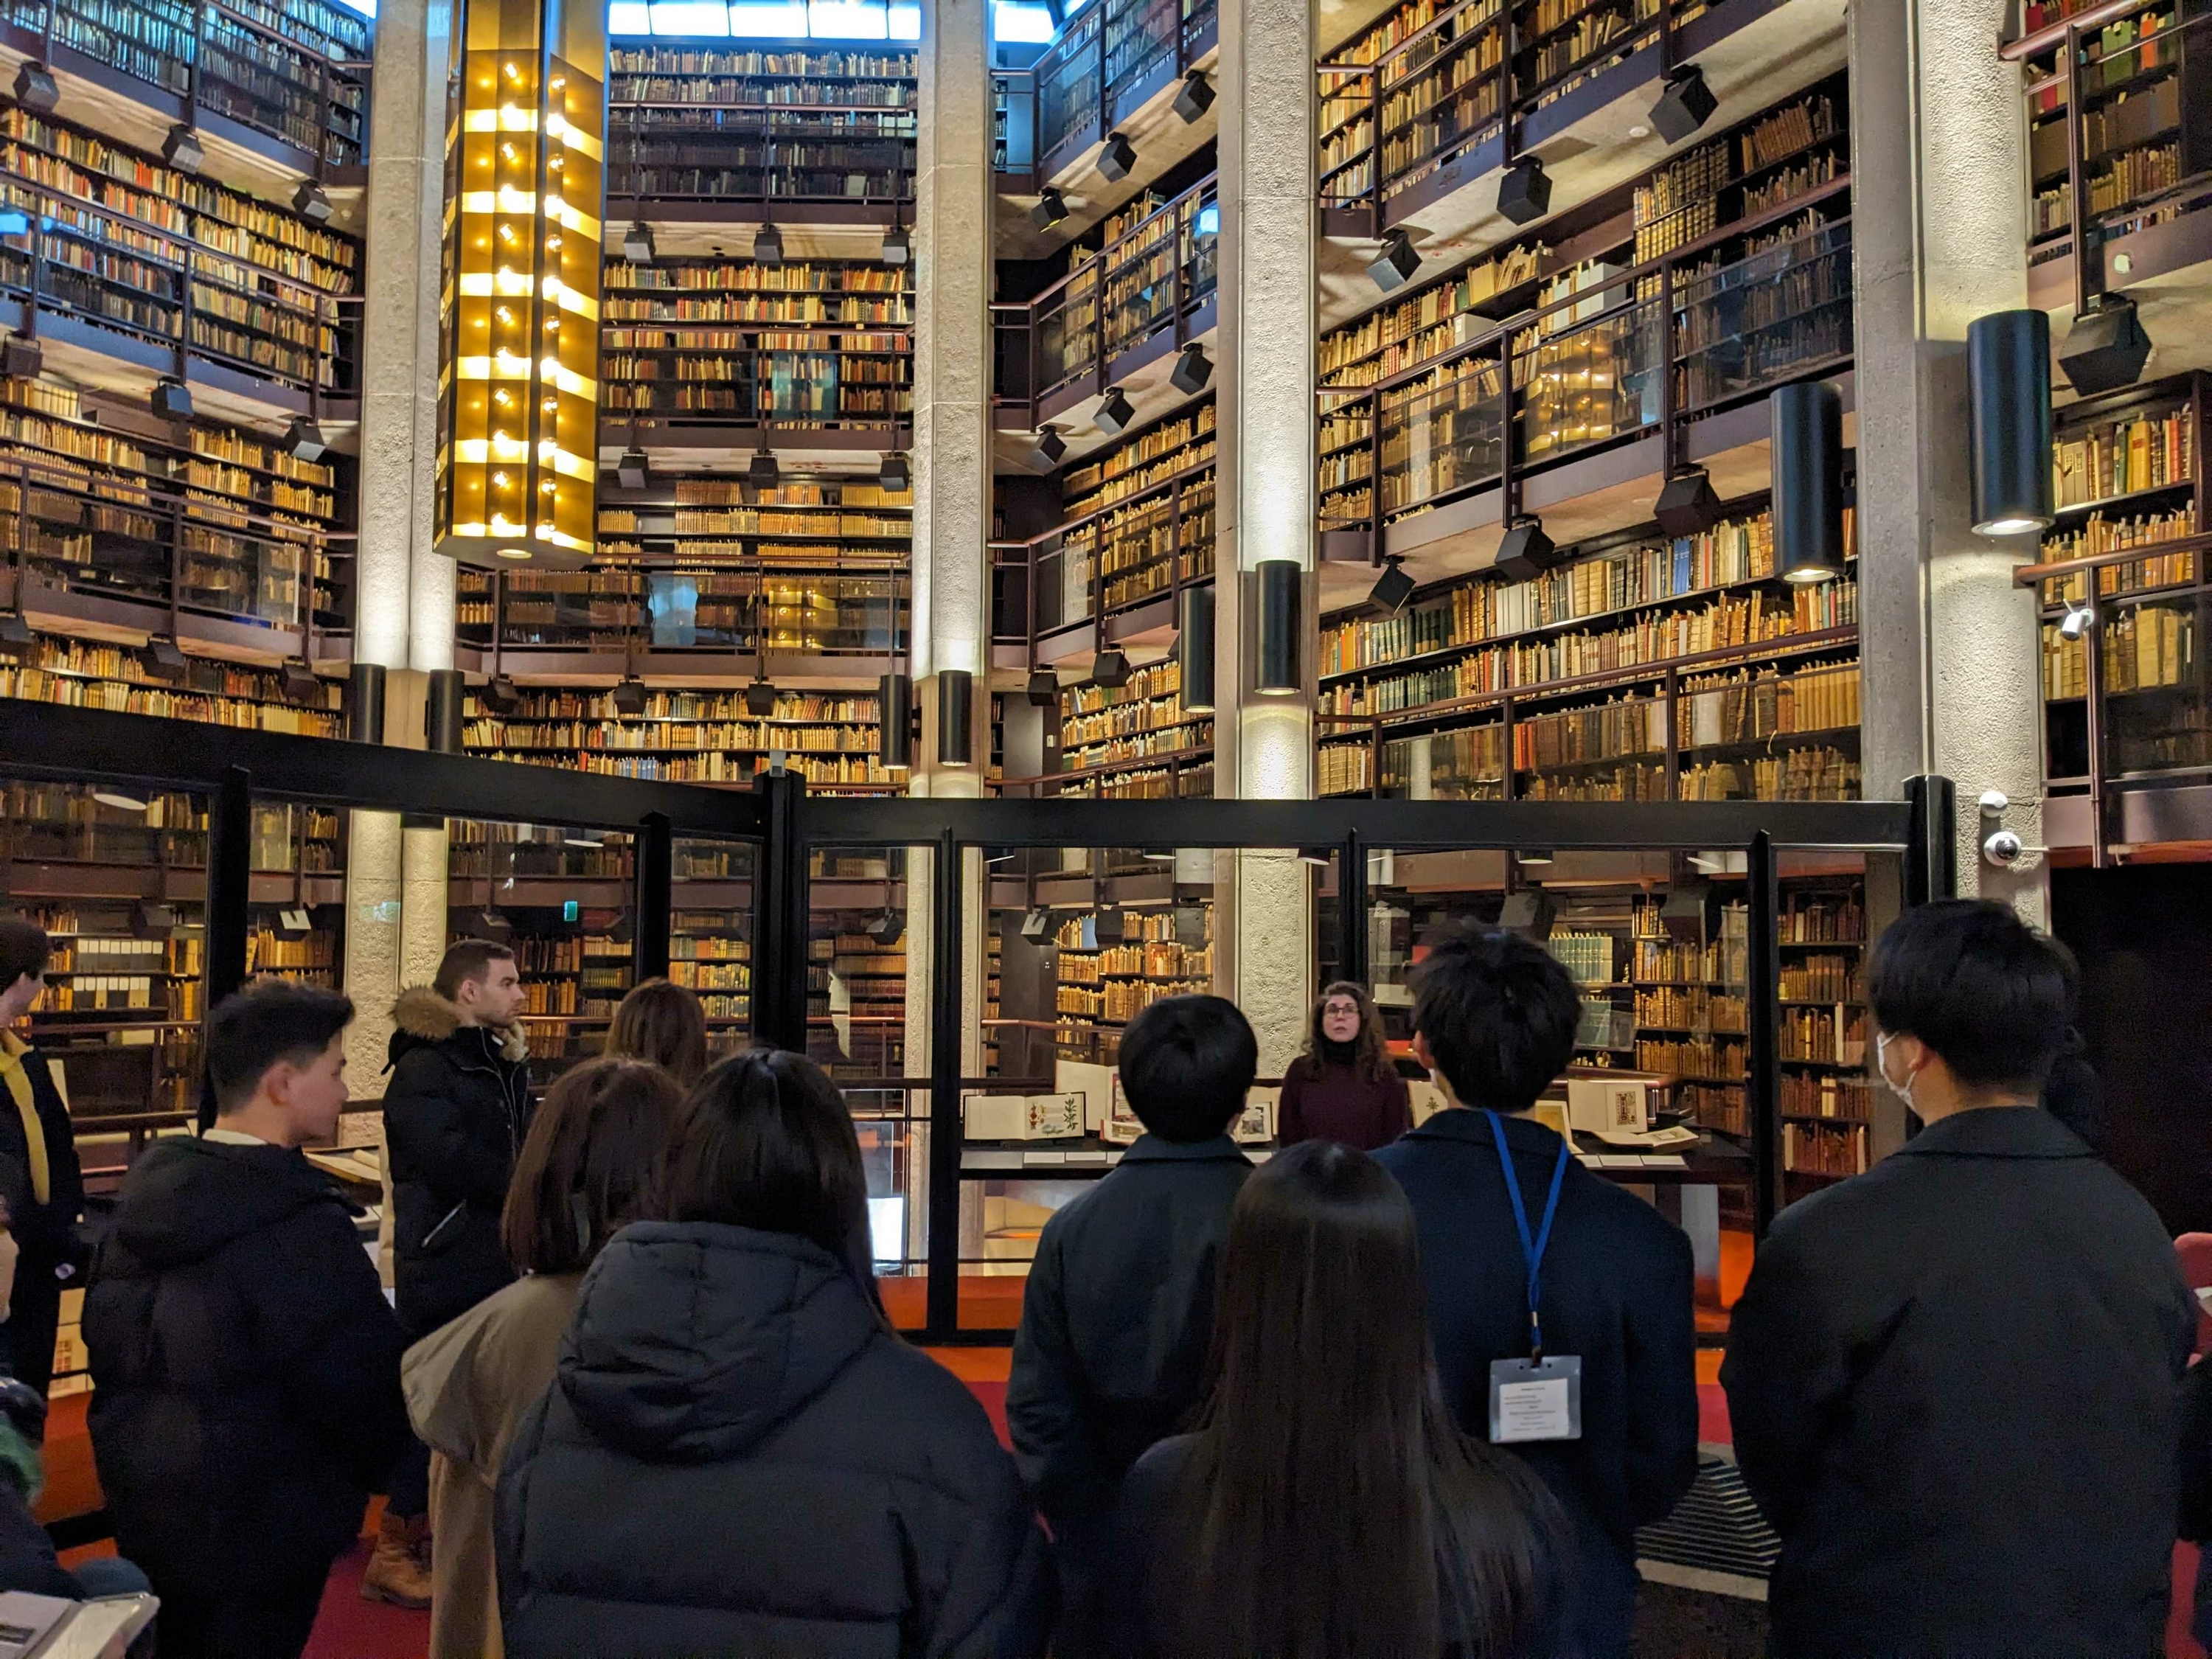 Students at the Rare Books Library at the University of Toronto.